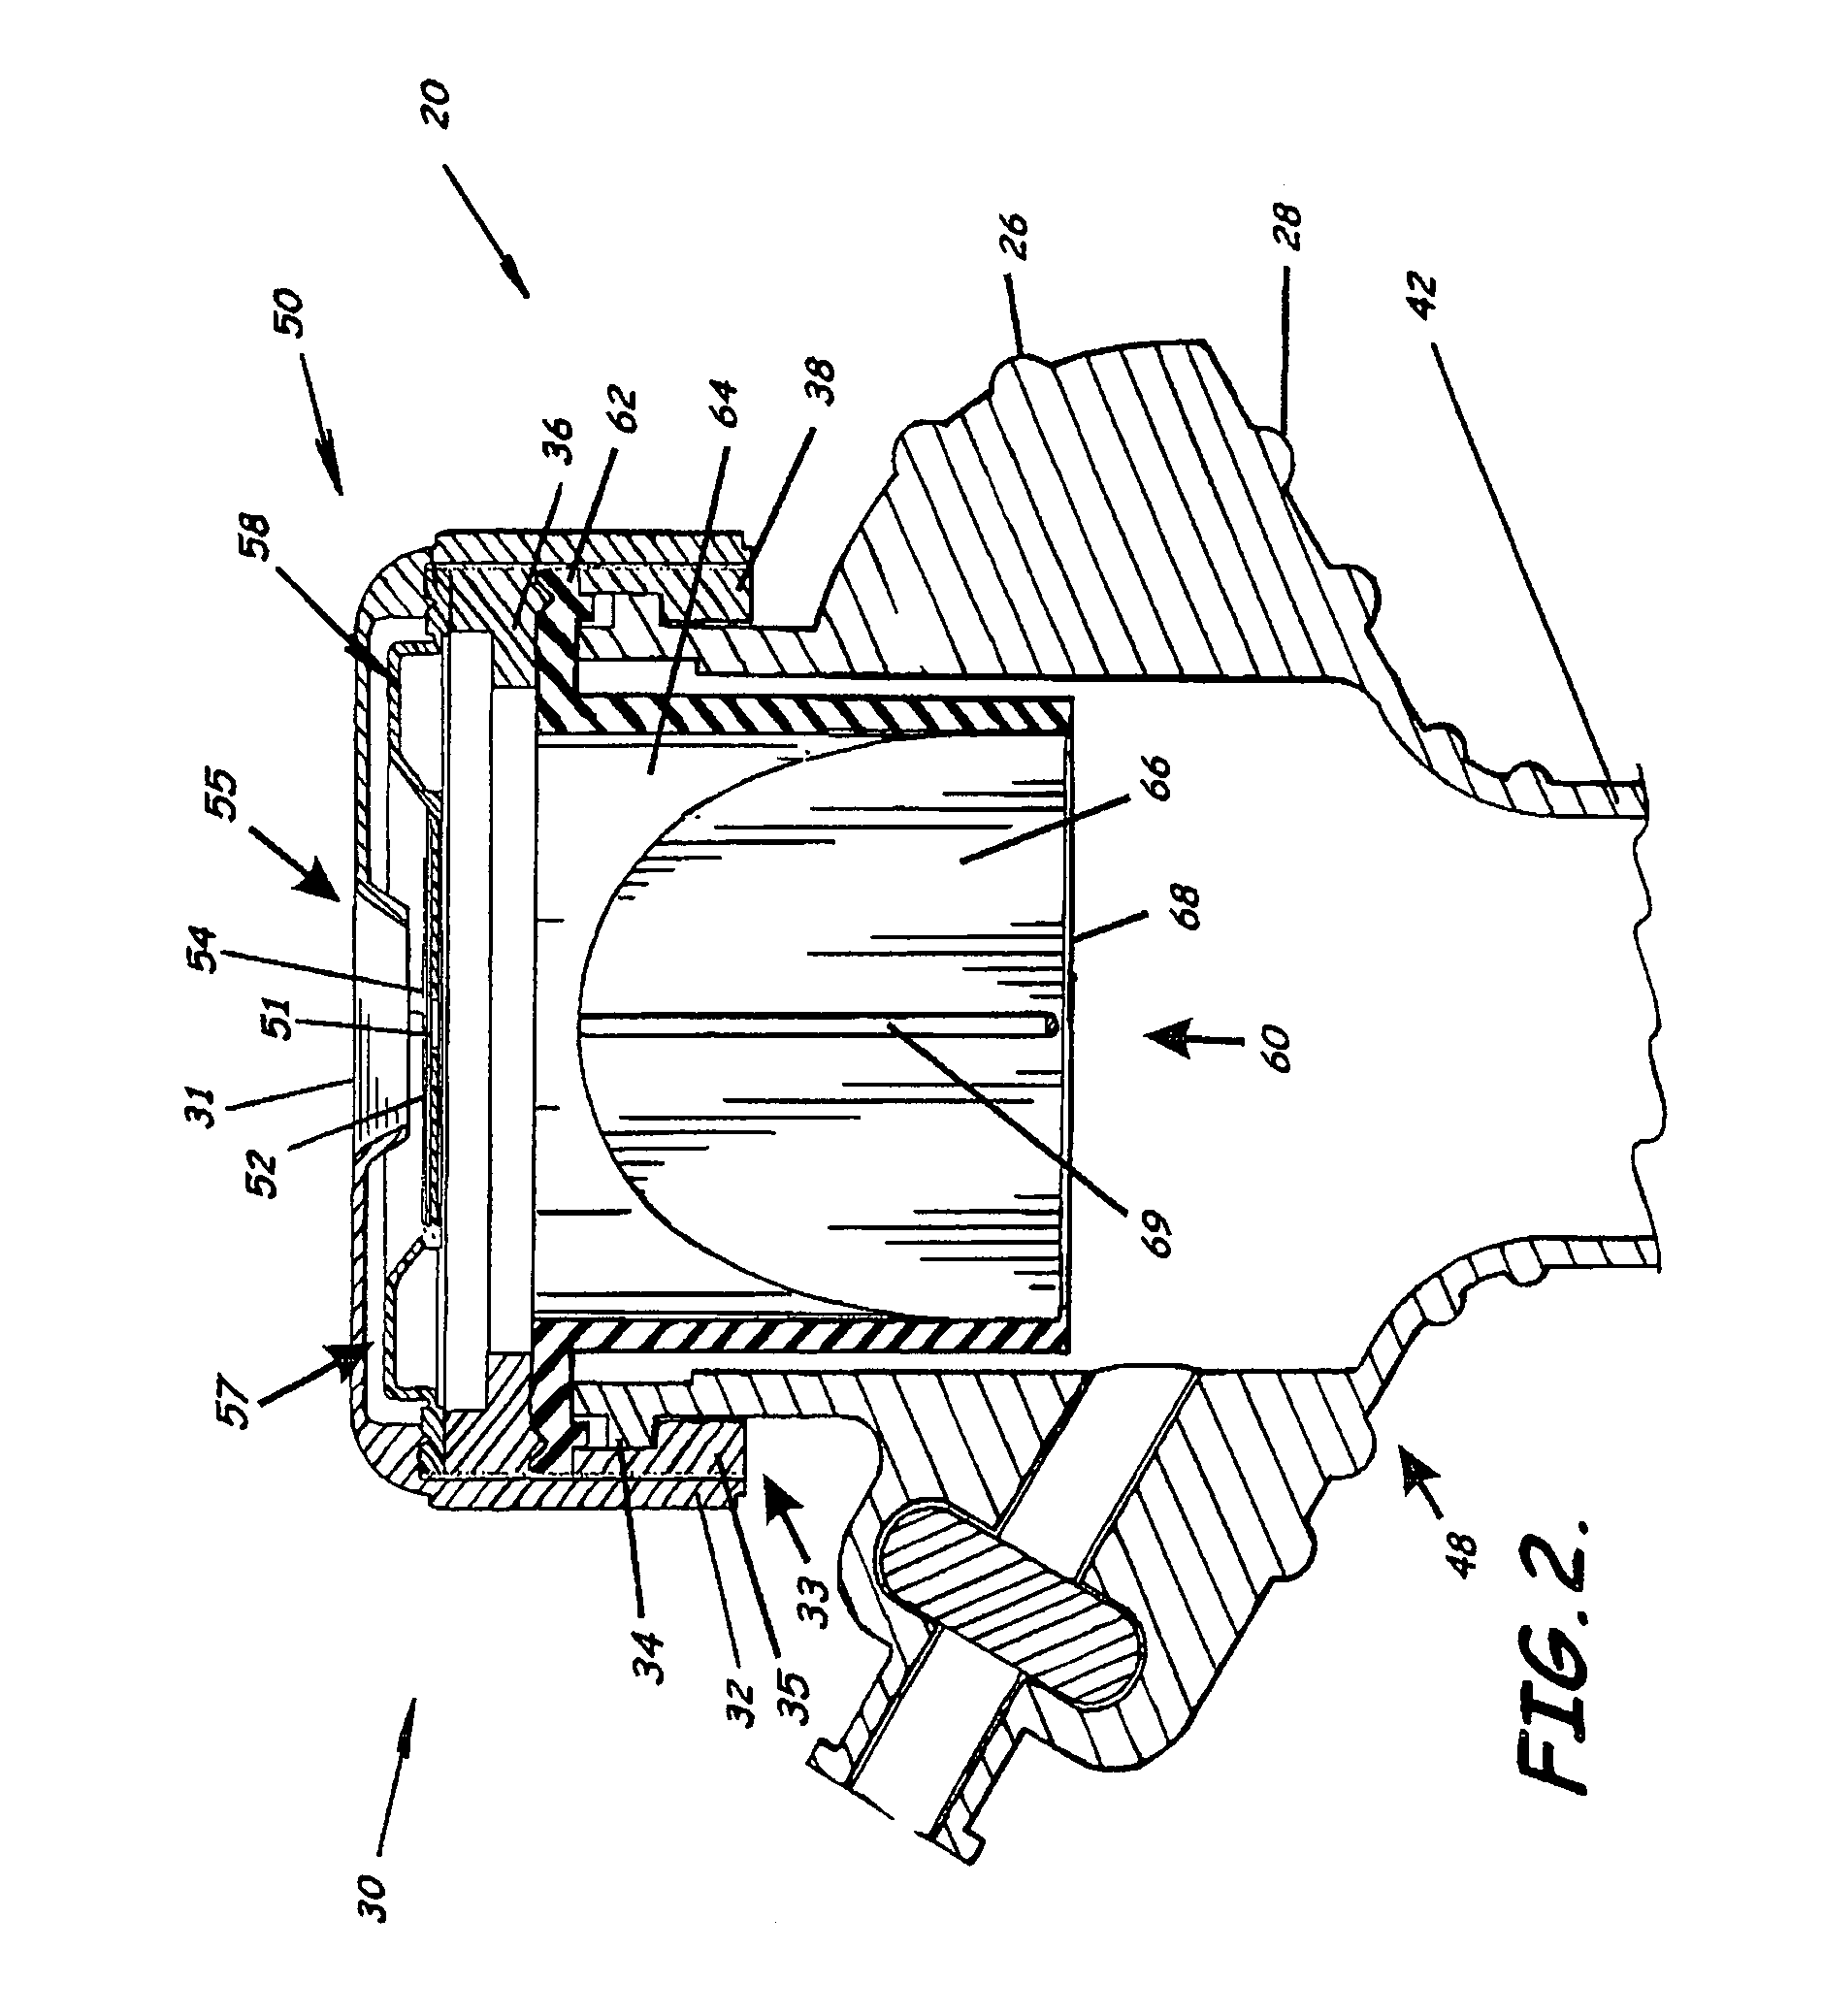 Trocar and cannula assembly having conical valve and related methods